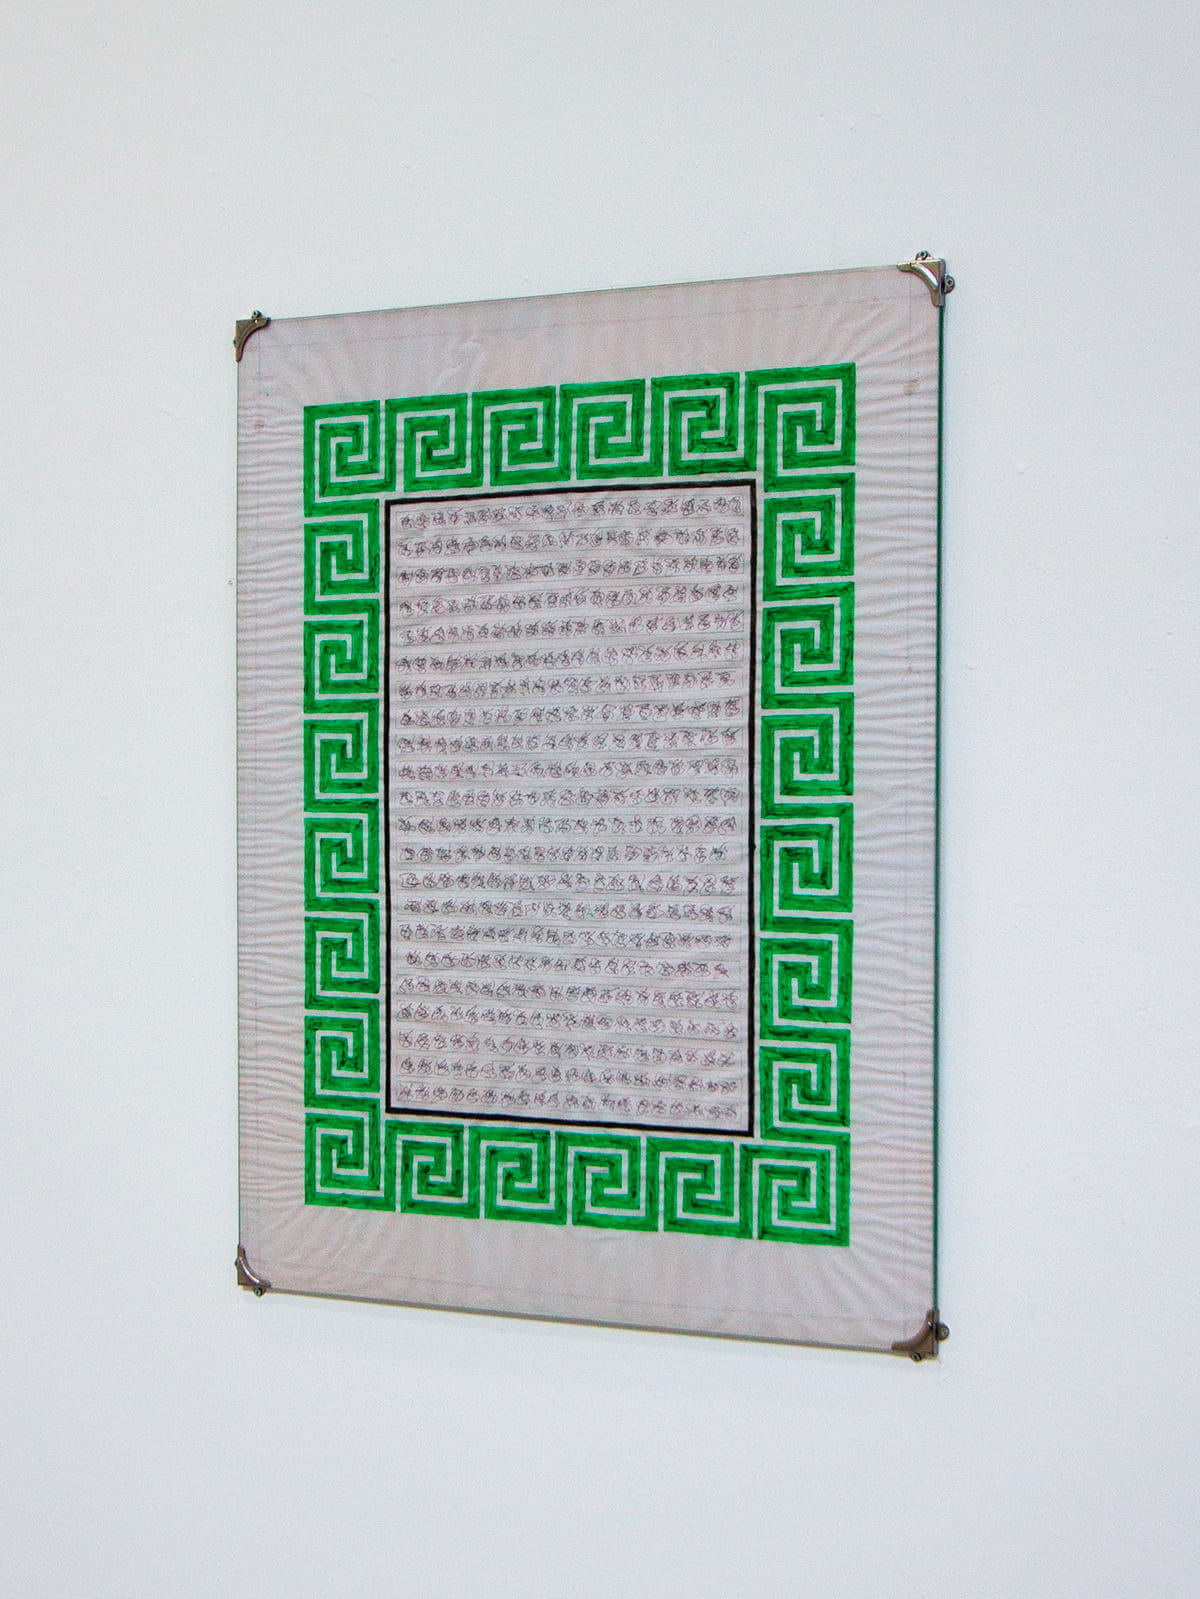 An image of a green and white poster on a white wall.